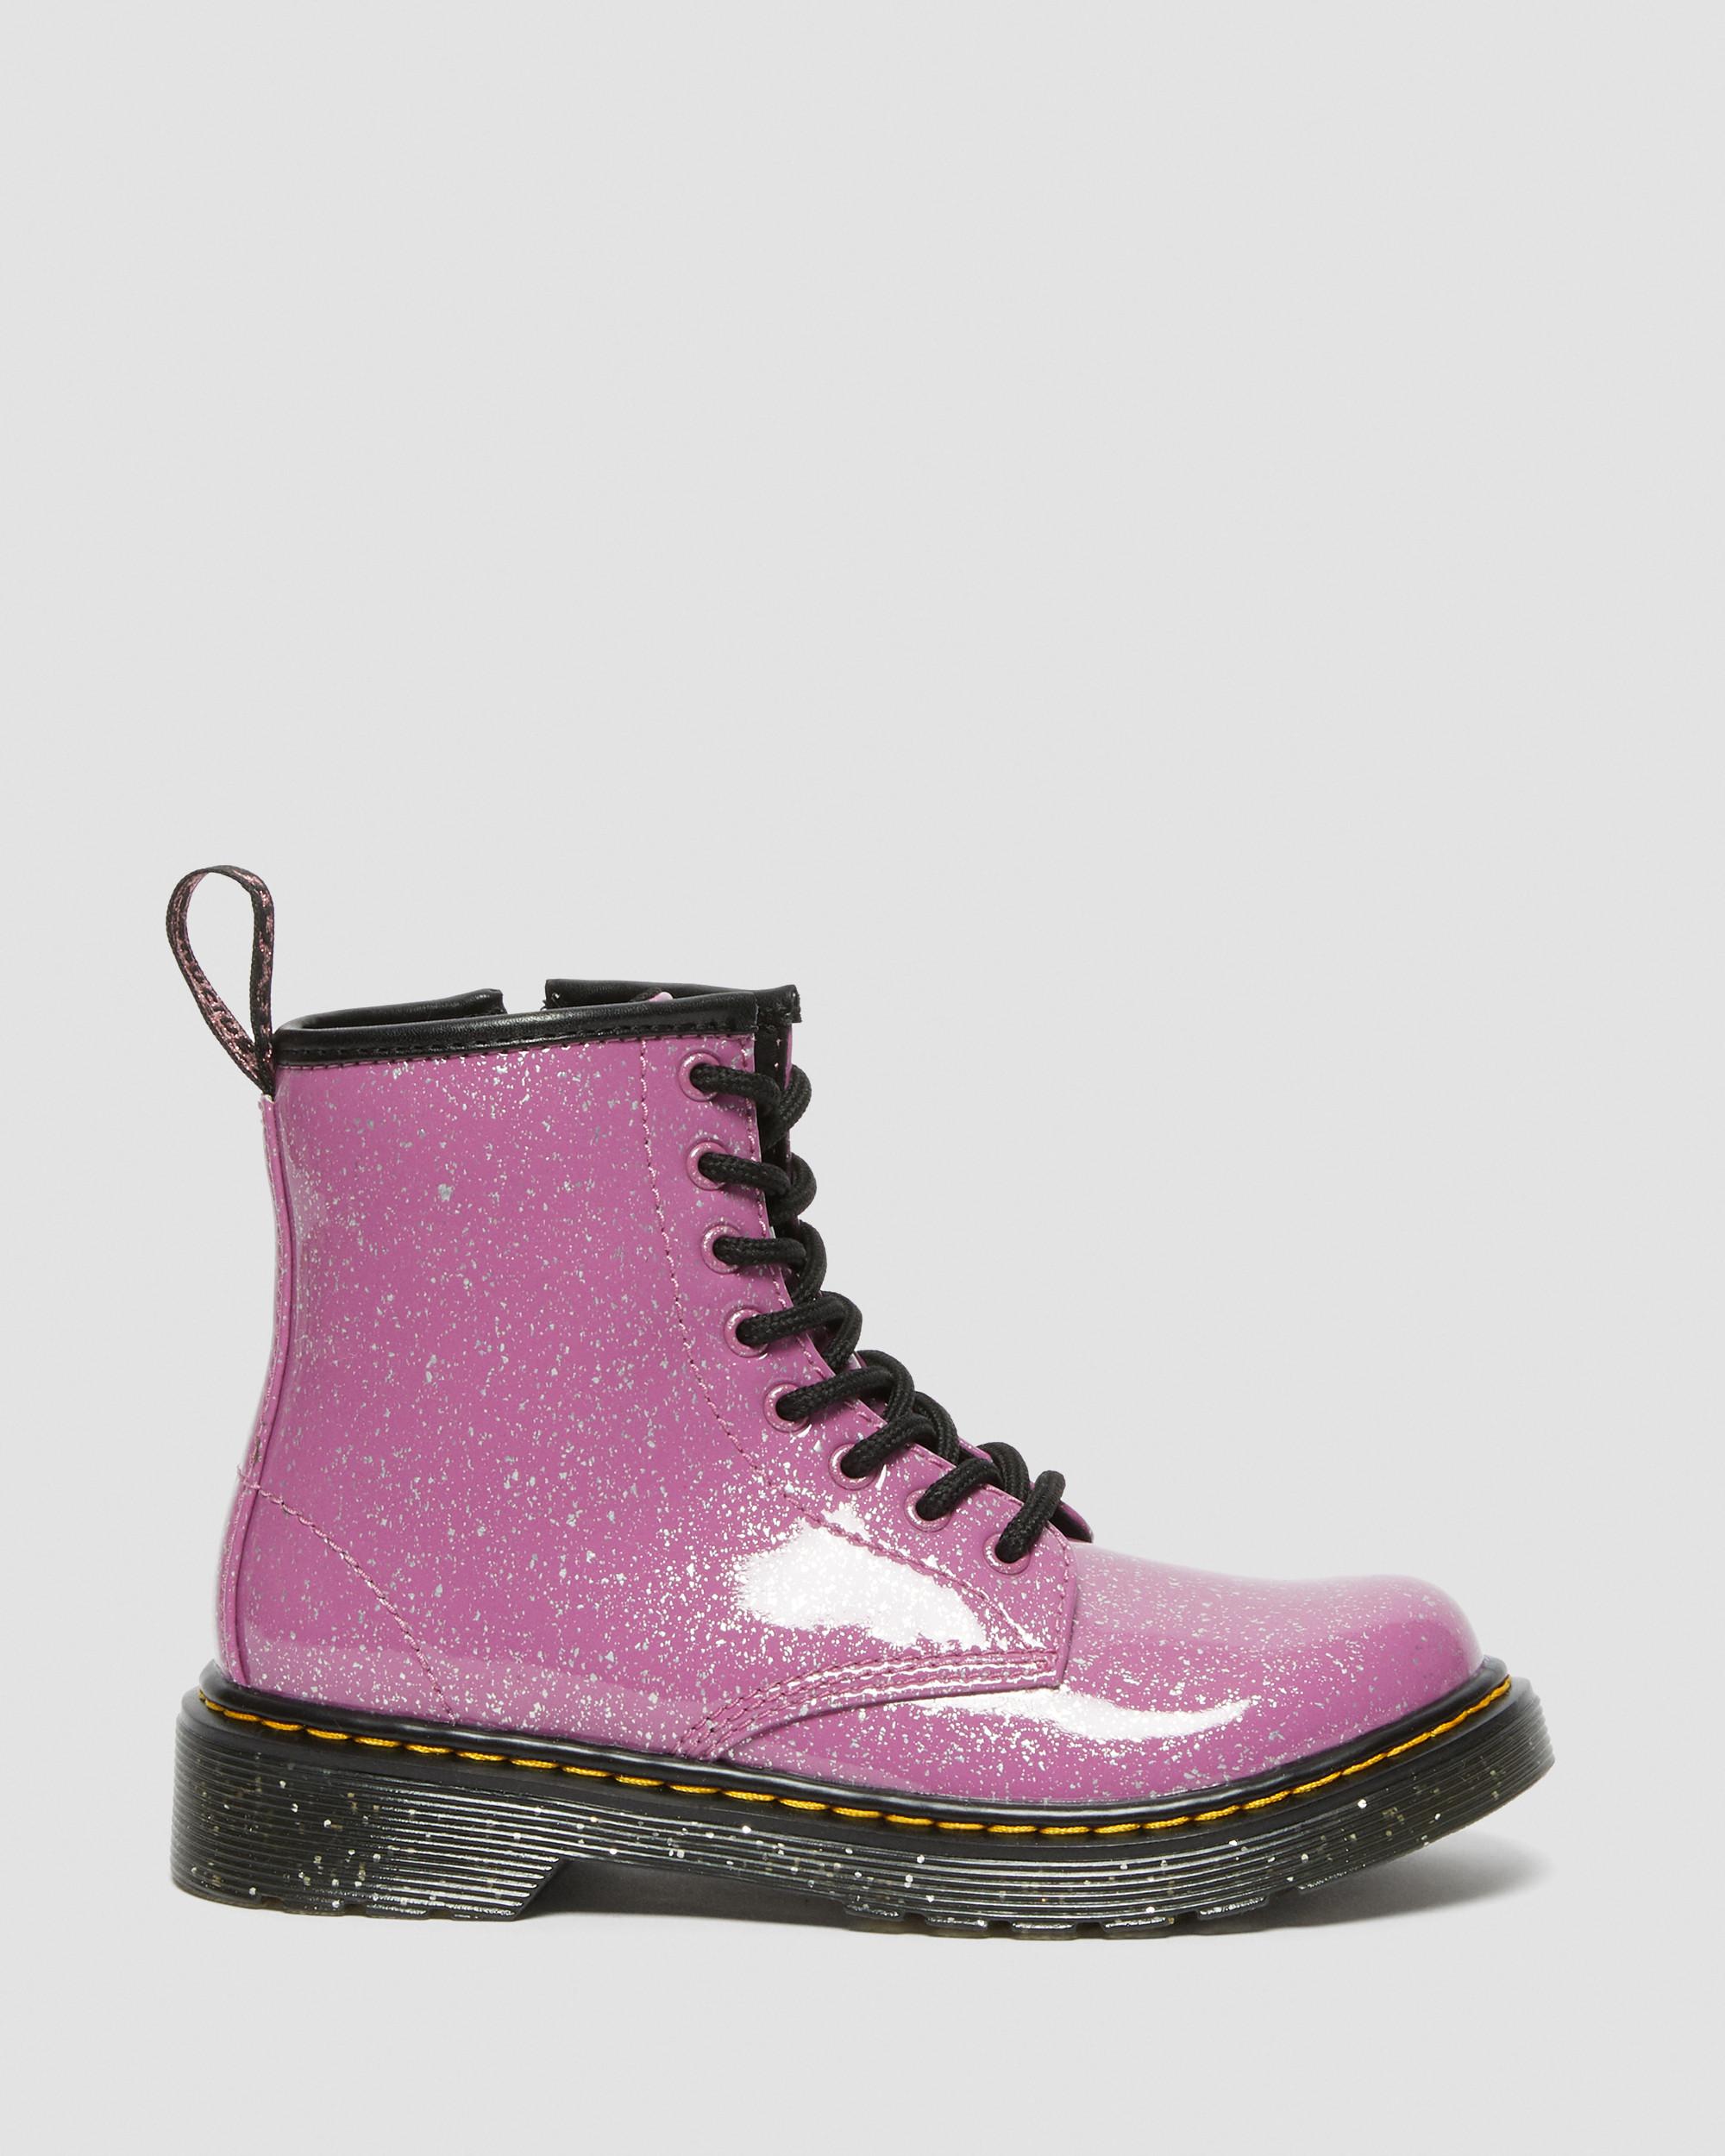 Junior 1460 Glitter Lace Up Boots, Pink | Dr. Martens